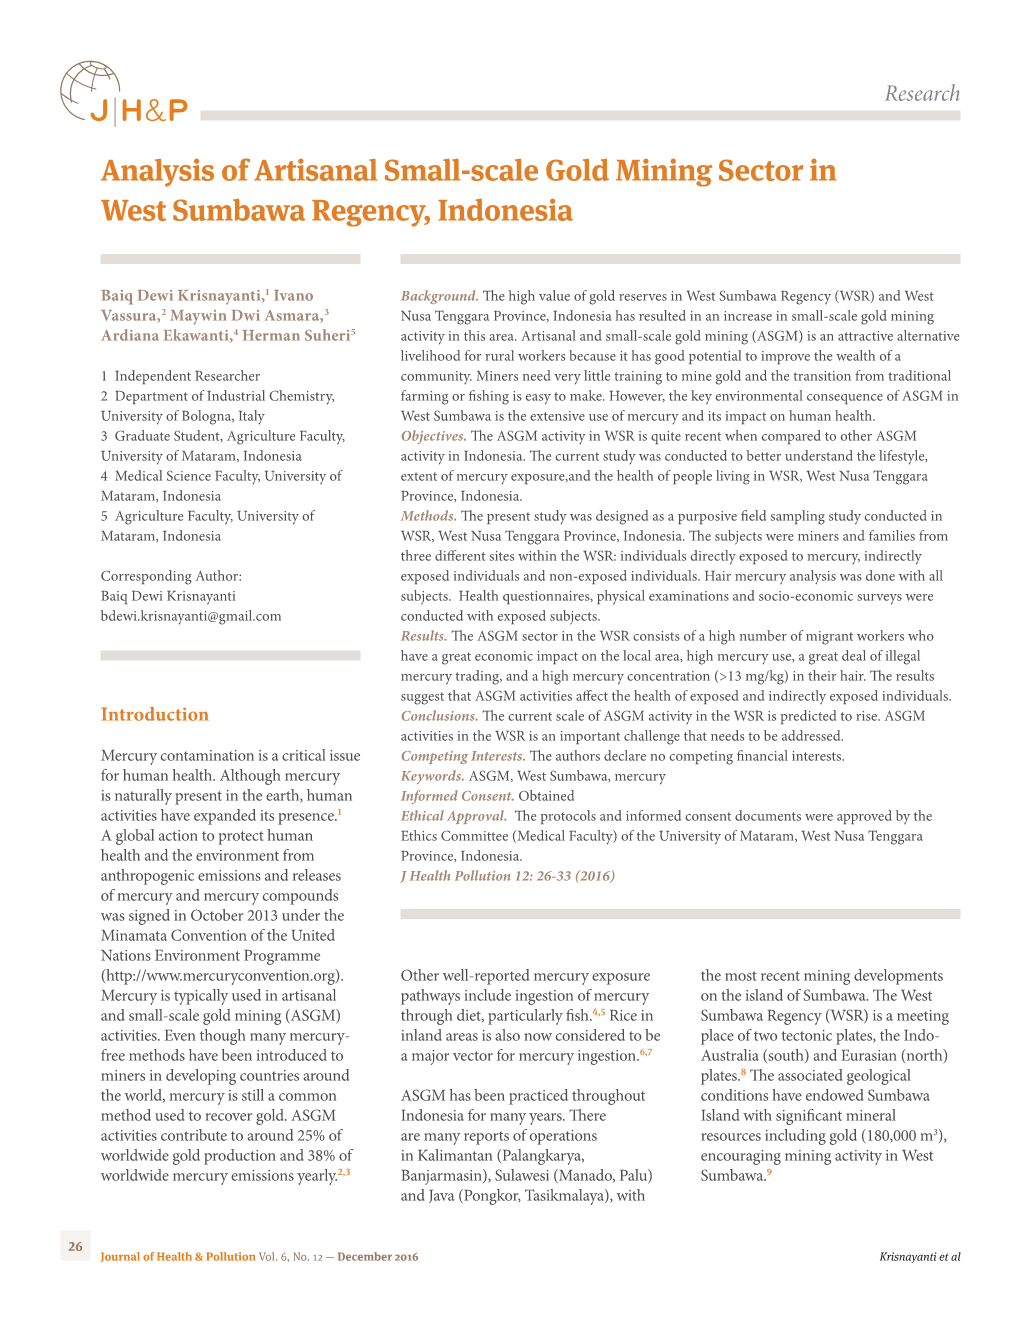 Analysis of Artisanal Small-Scale Gold Mining Sector in West Sumbawa Regency, Indonesia